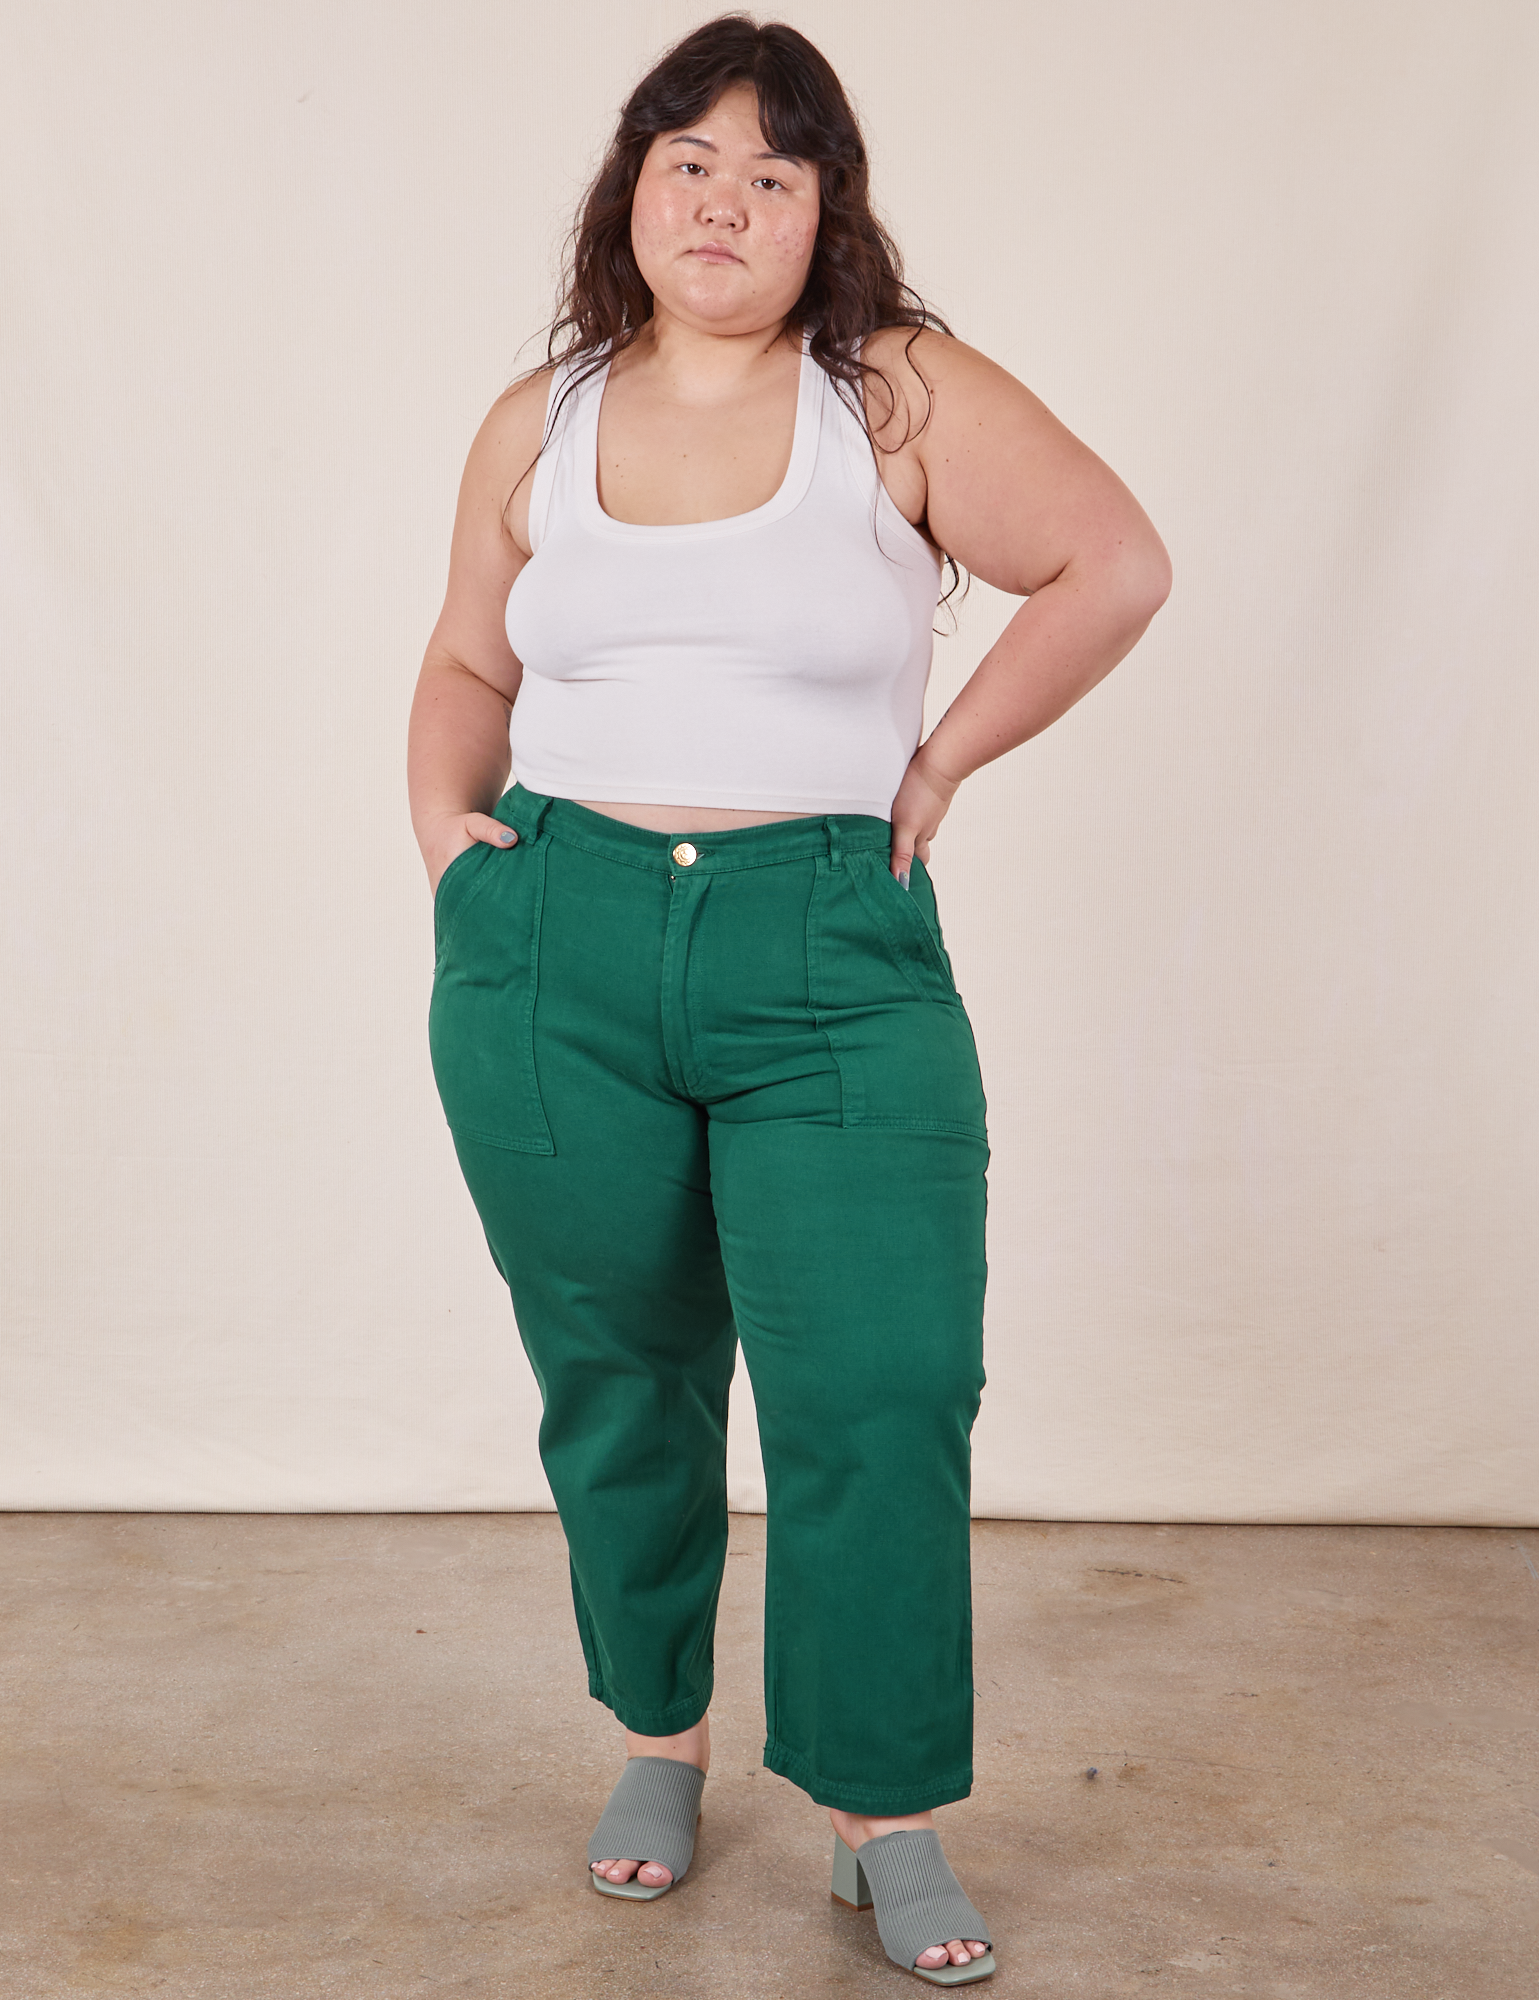 Ashley is 5&#39;7&quot; and wearing 1XL Petite Work Pants in Hunter Green paired with Cropped Tank Top in vintage tee off-white